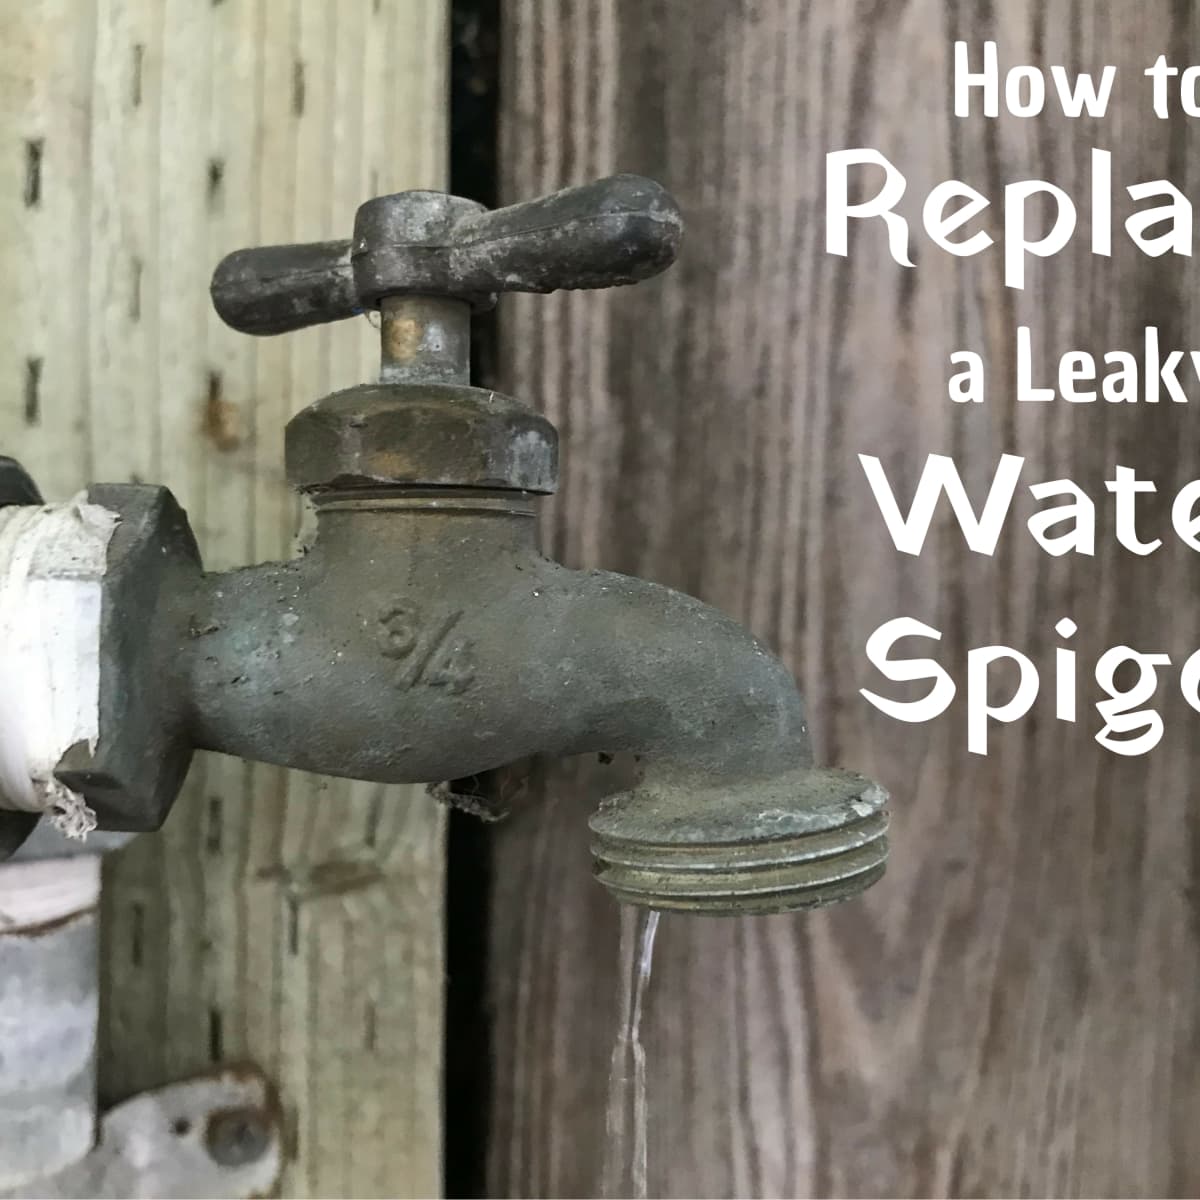 Leaky Outdoor Faucet Or Water Spigot, How To Install A Garden Hose Bib